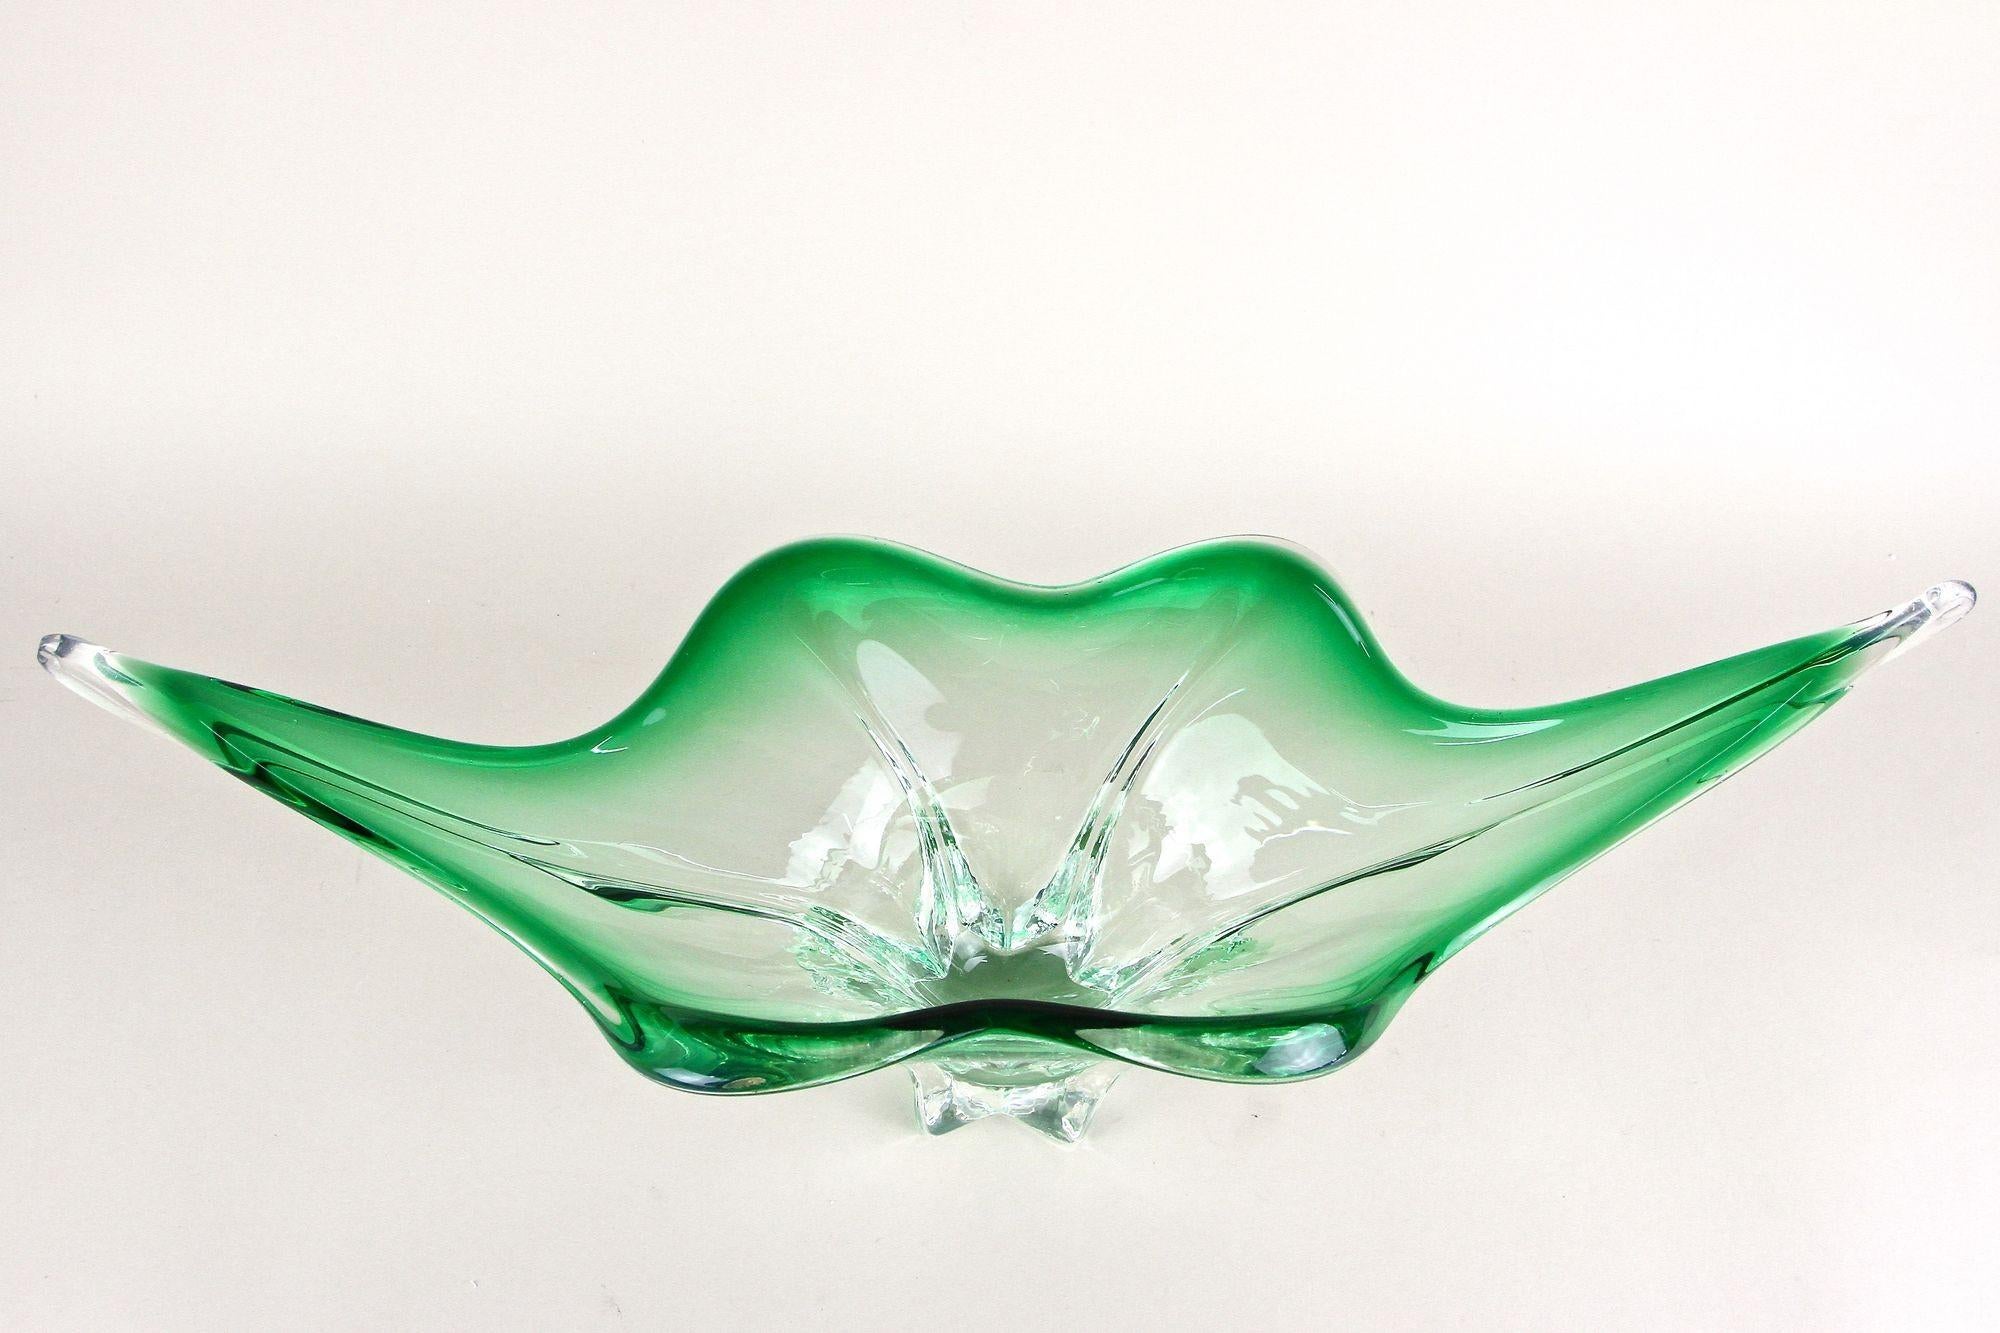 Mid-Century Modern Mid Century Modern Murano Glass Bowl, Green/ Clear Tones - Italy ca. 1960 For Sale